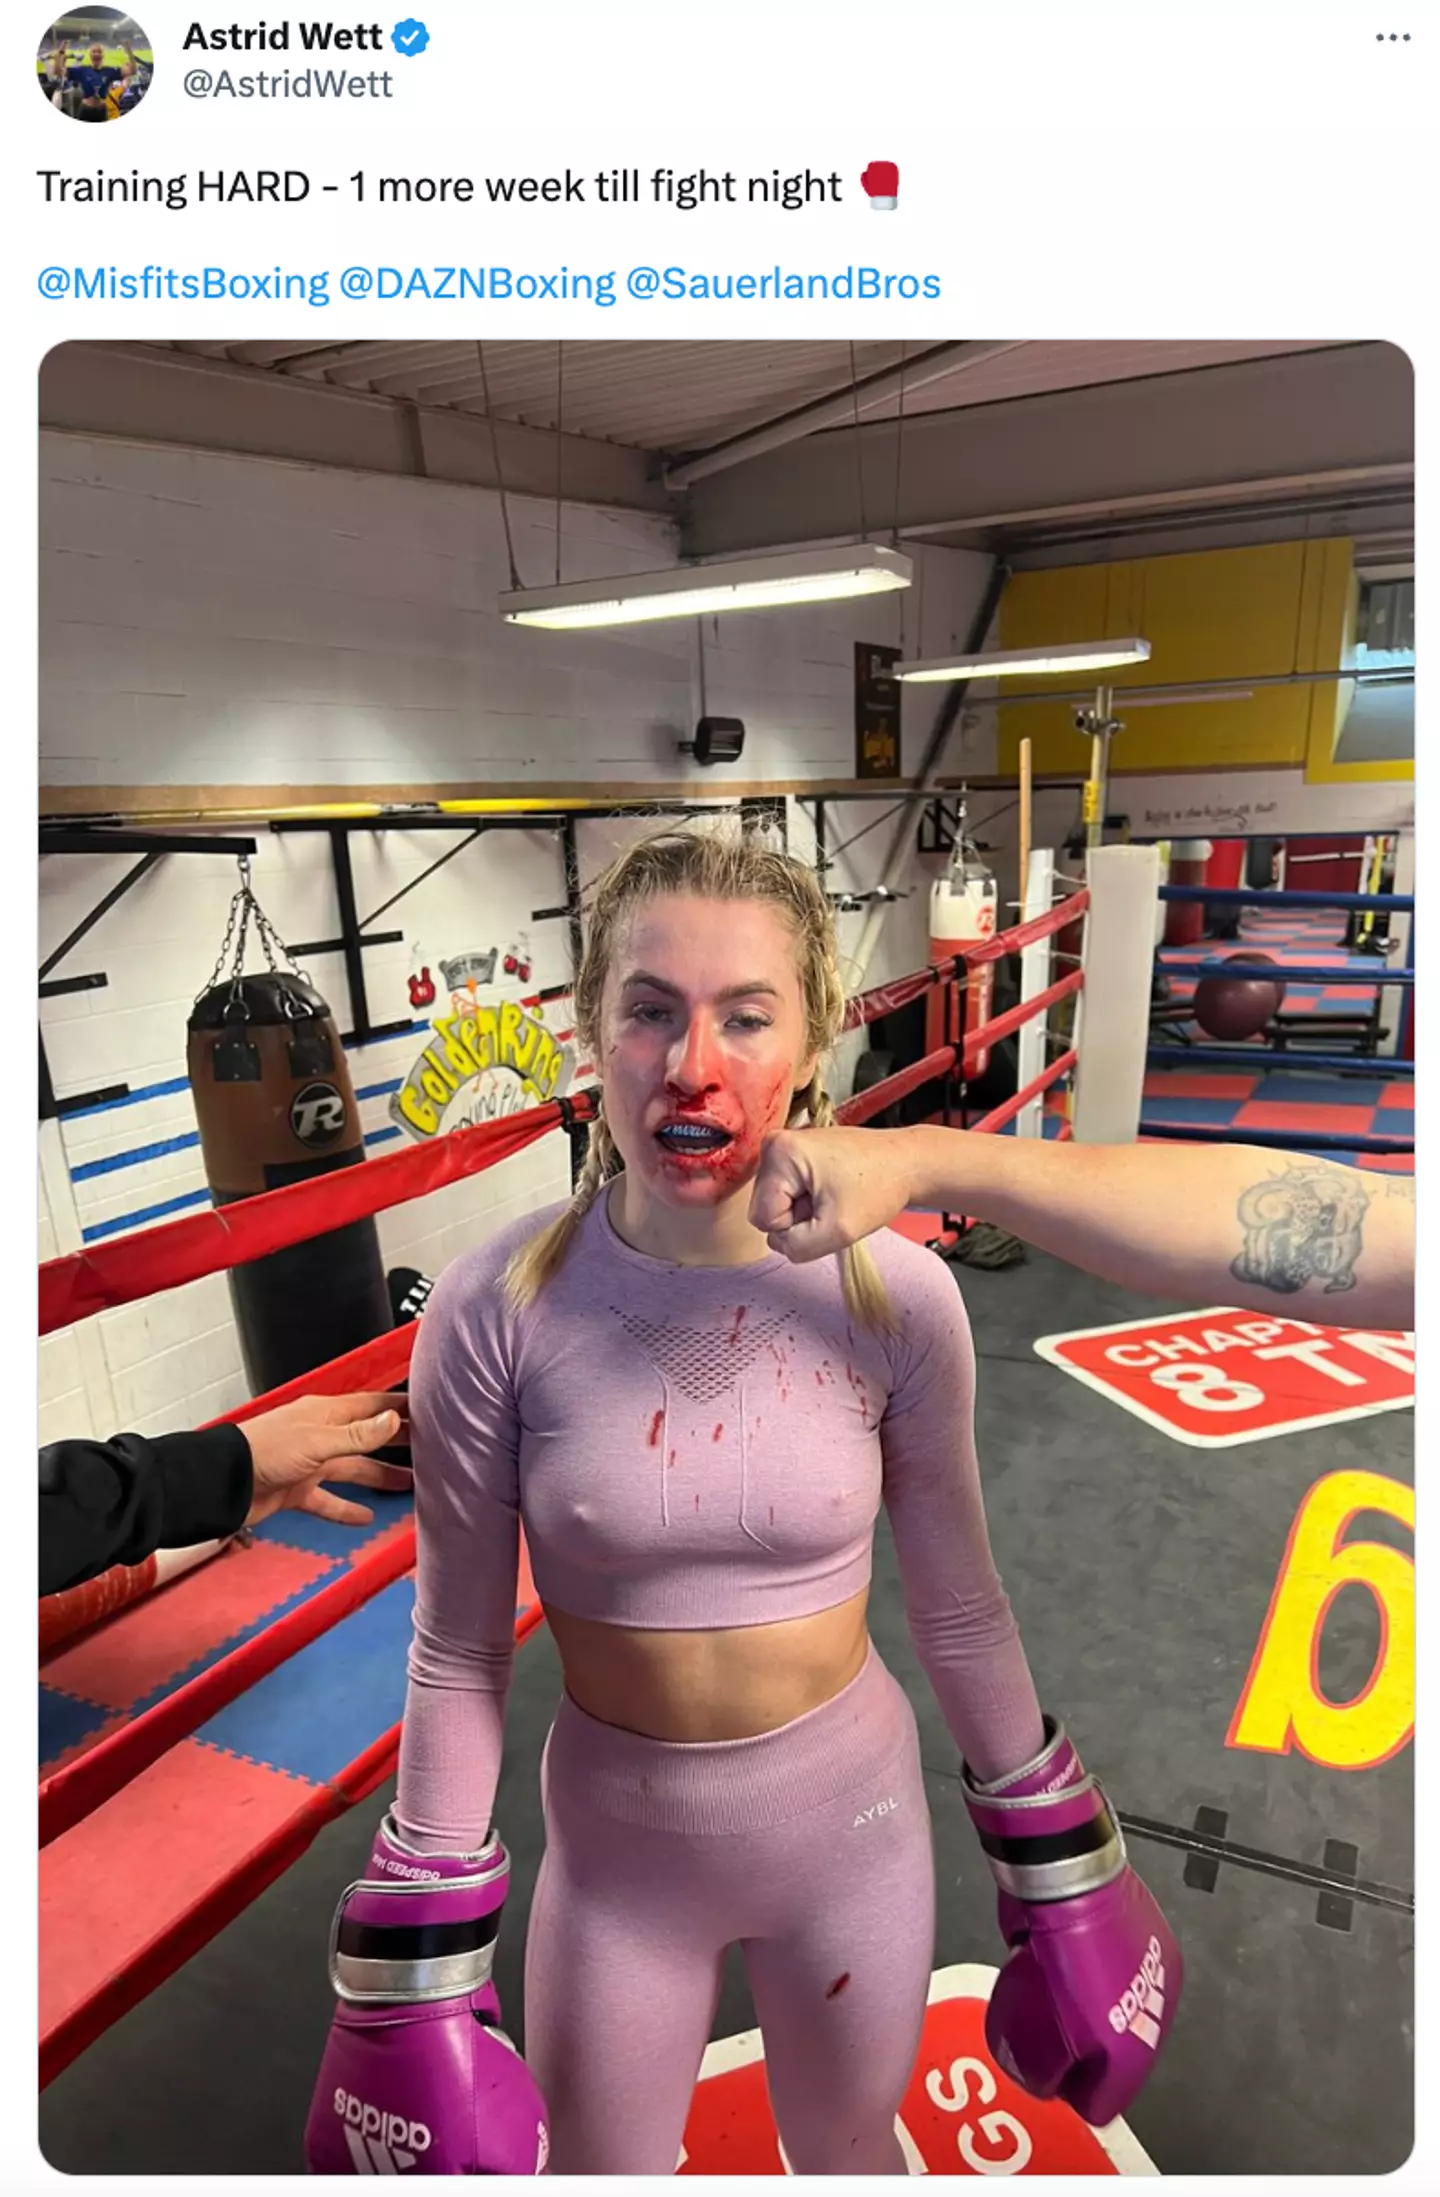 Astrid was seen with a bloody nose during her training.